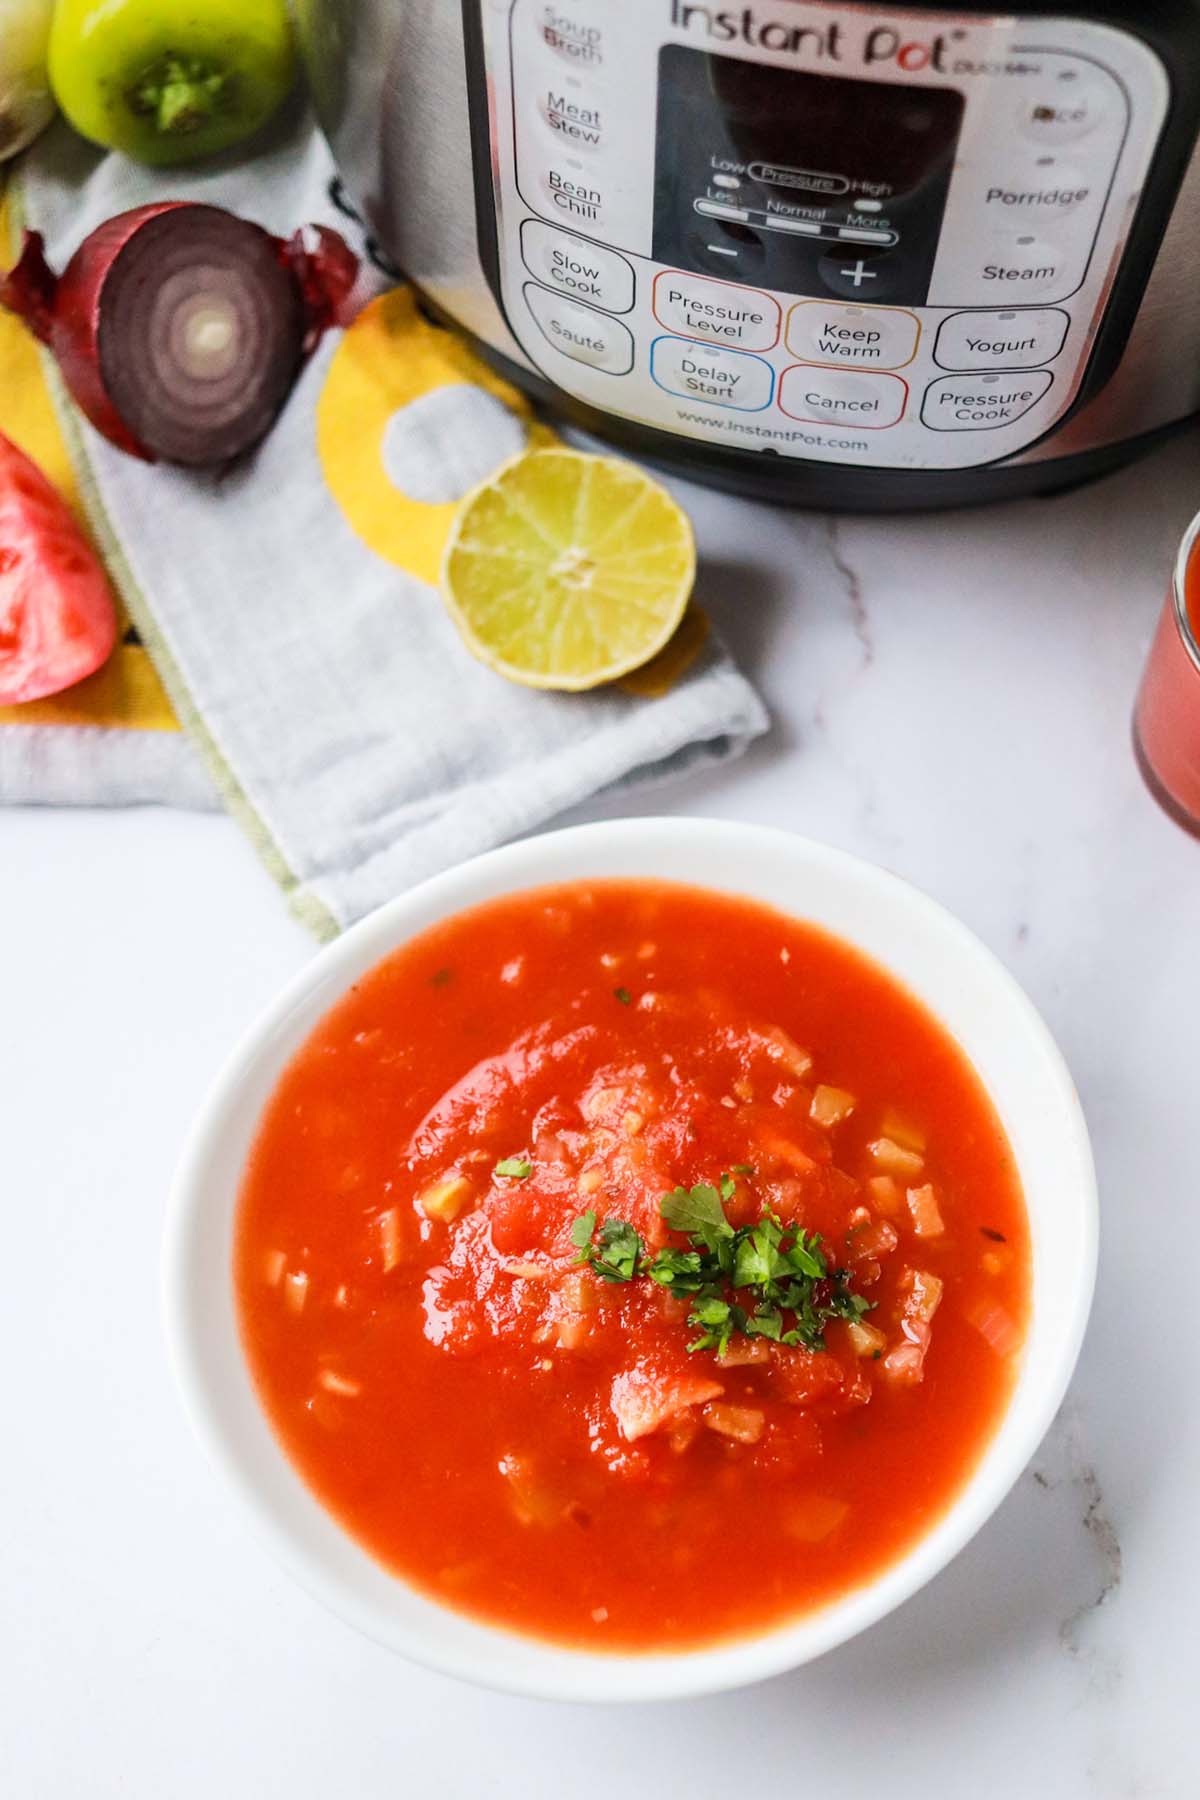 Salsa in a bowl in front of the Instant Pot.